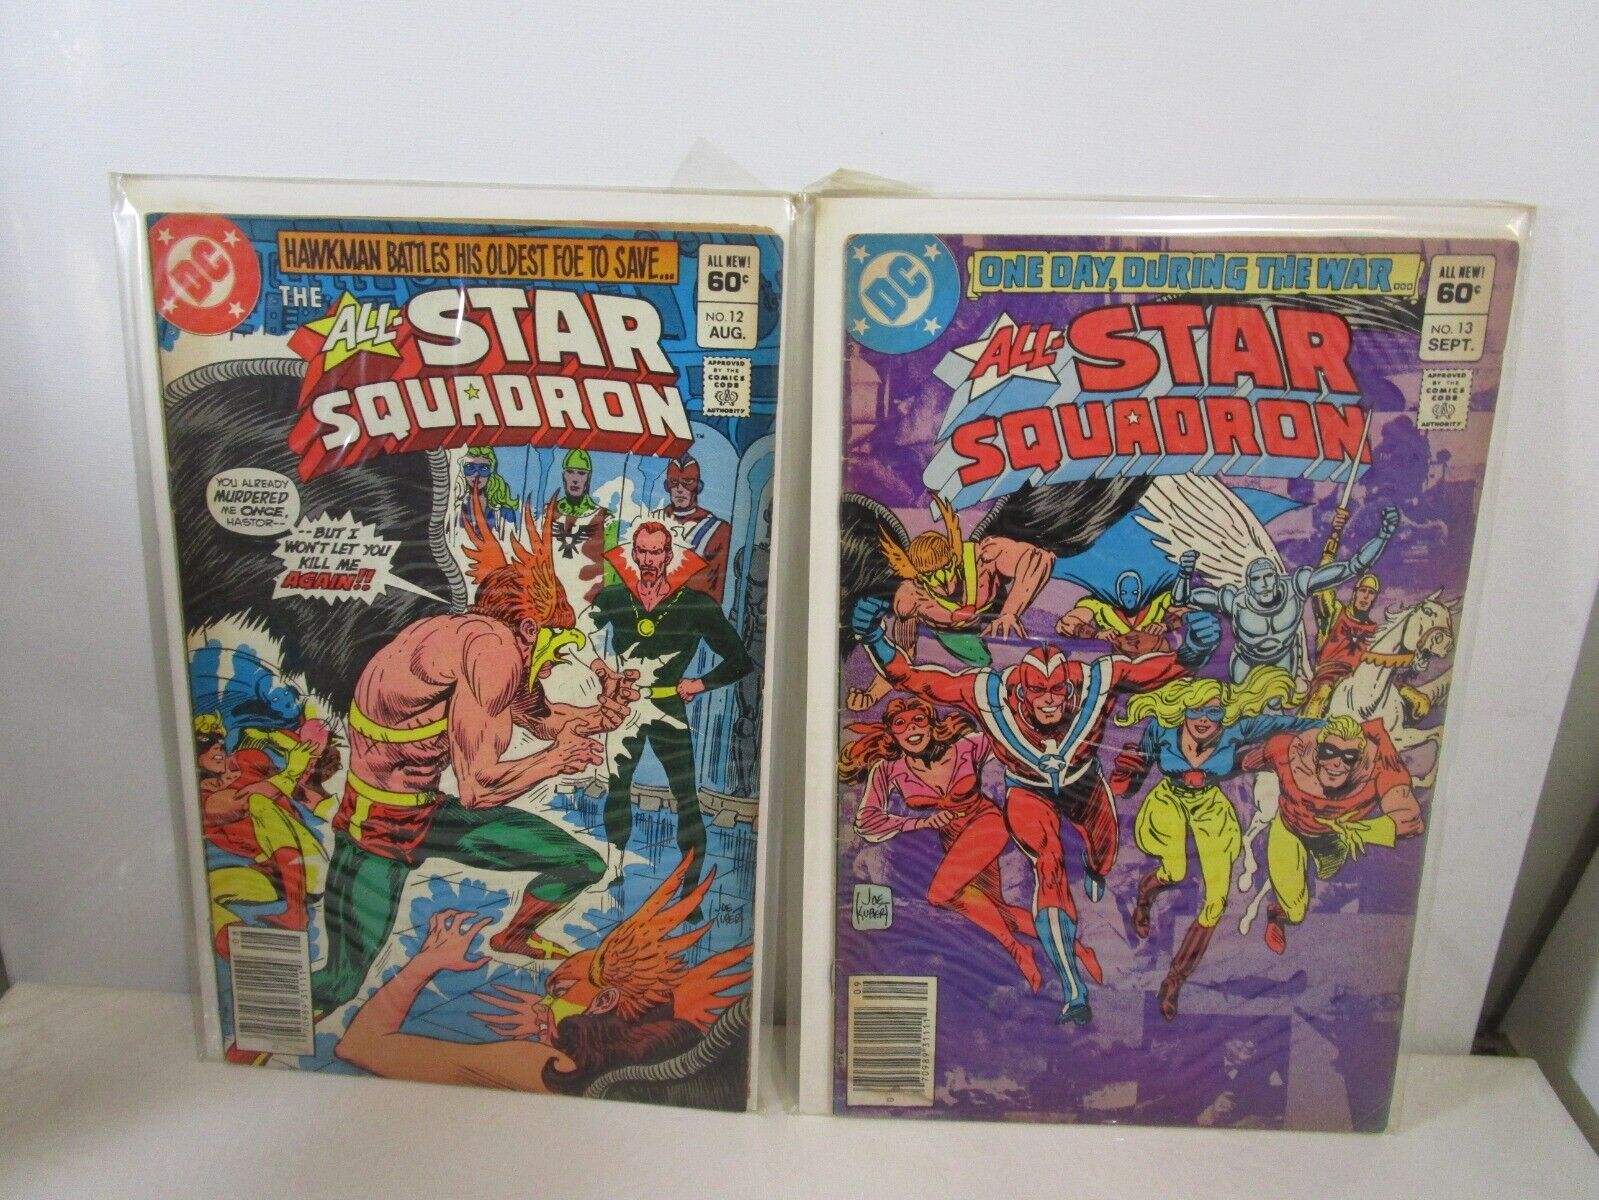 All-Star Squadron #12-13 DC Comics (1982) Bagged Boarded